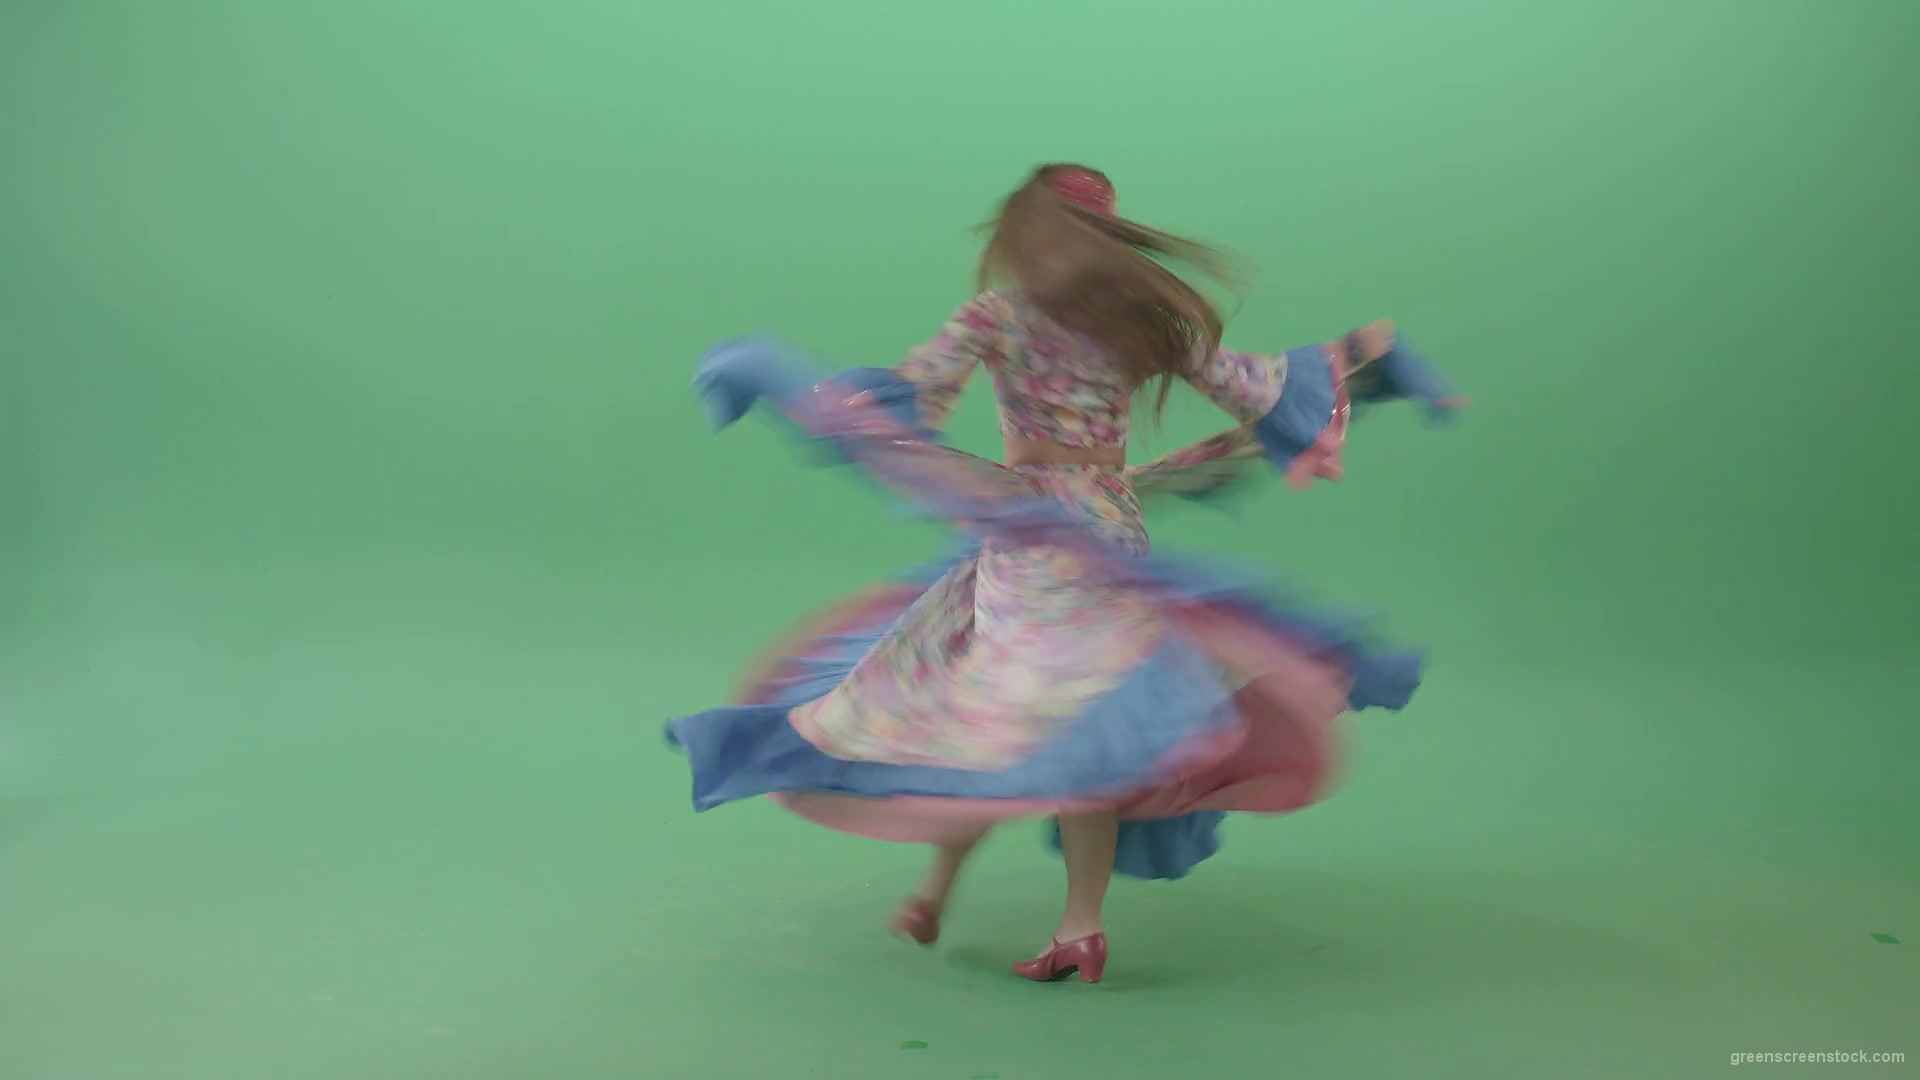 Elegant-movement-by-Gypsy-girl-in-moldova-costume-isolated-on-green-screen-4K-Video-Footage-clip-1920_009 Green Screen Stock